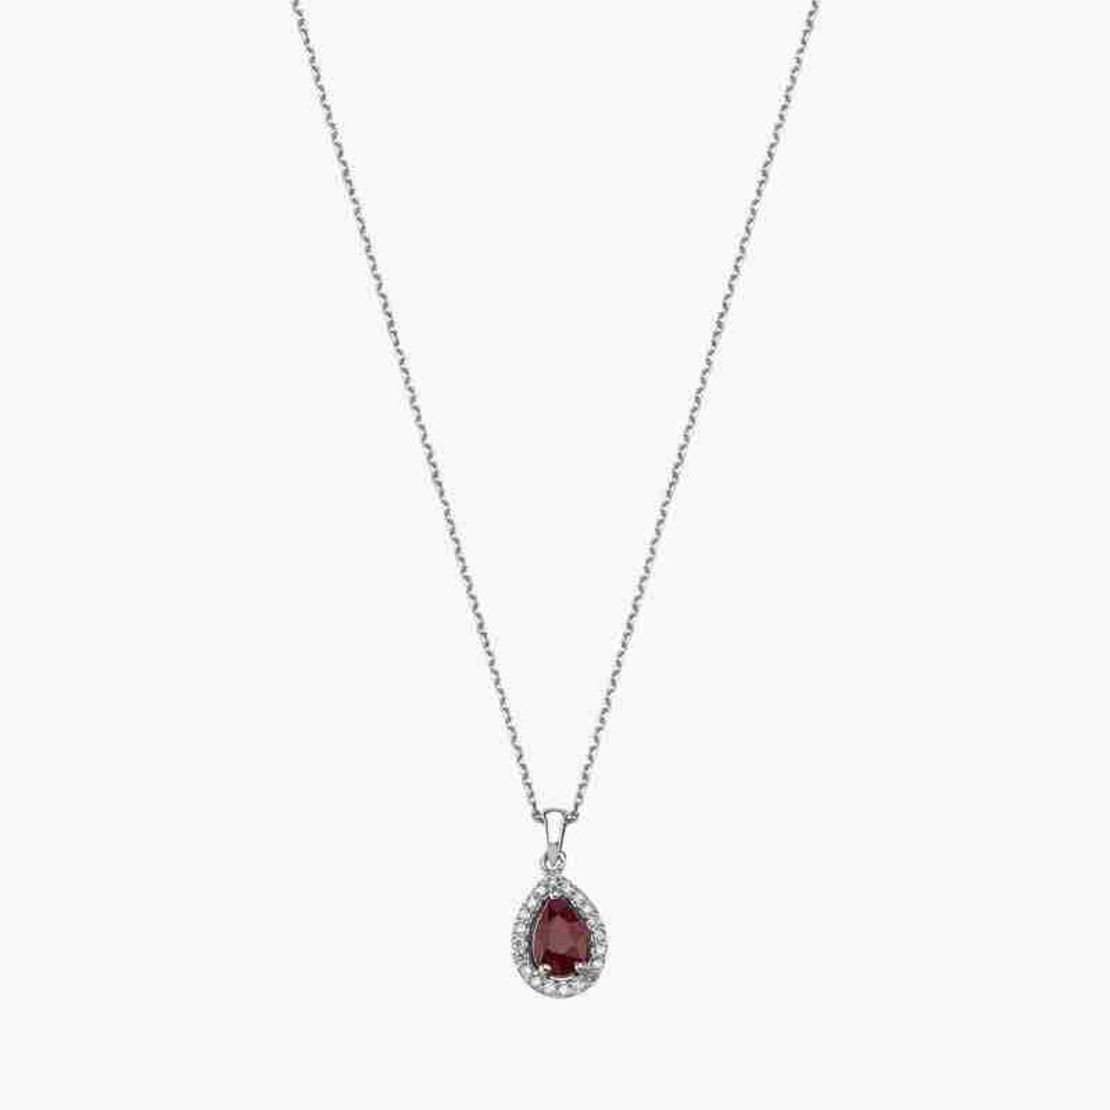 0.55 ct Ruby and diamonds necklace